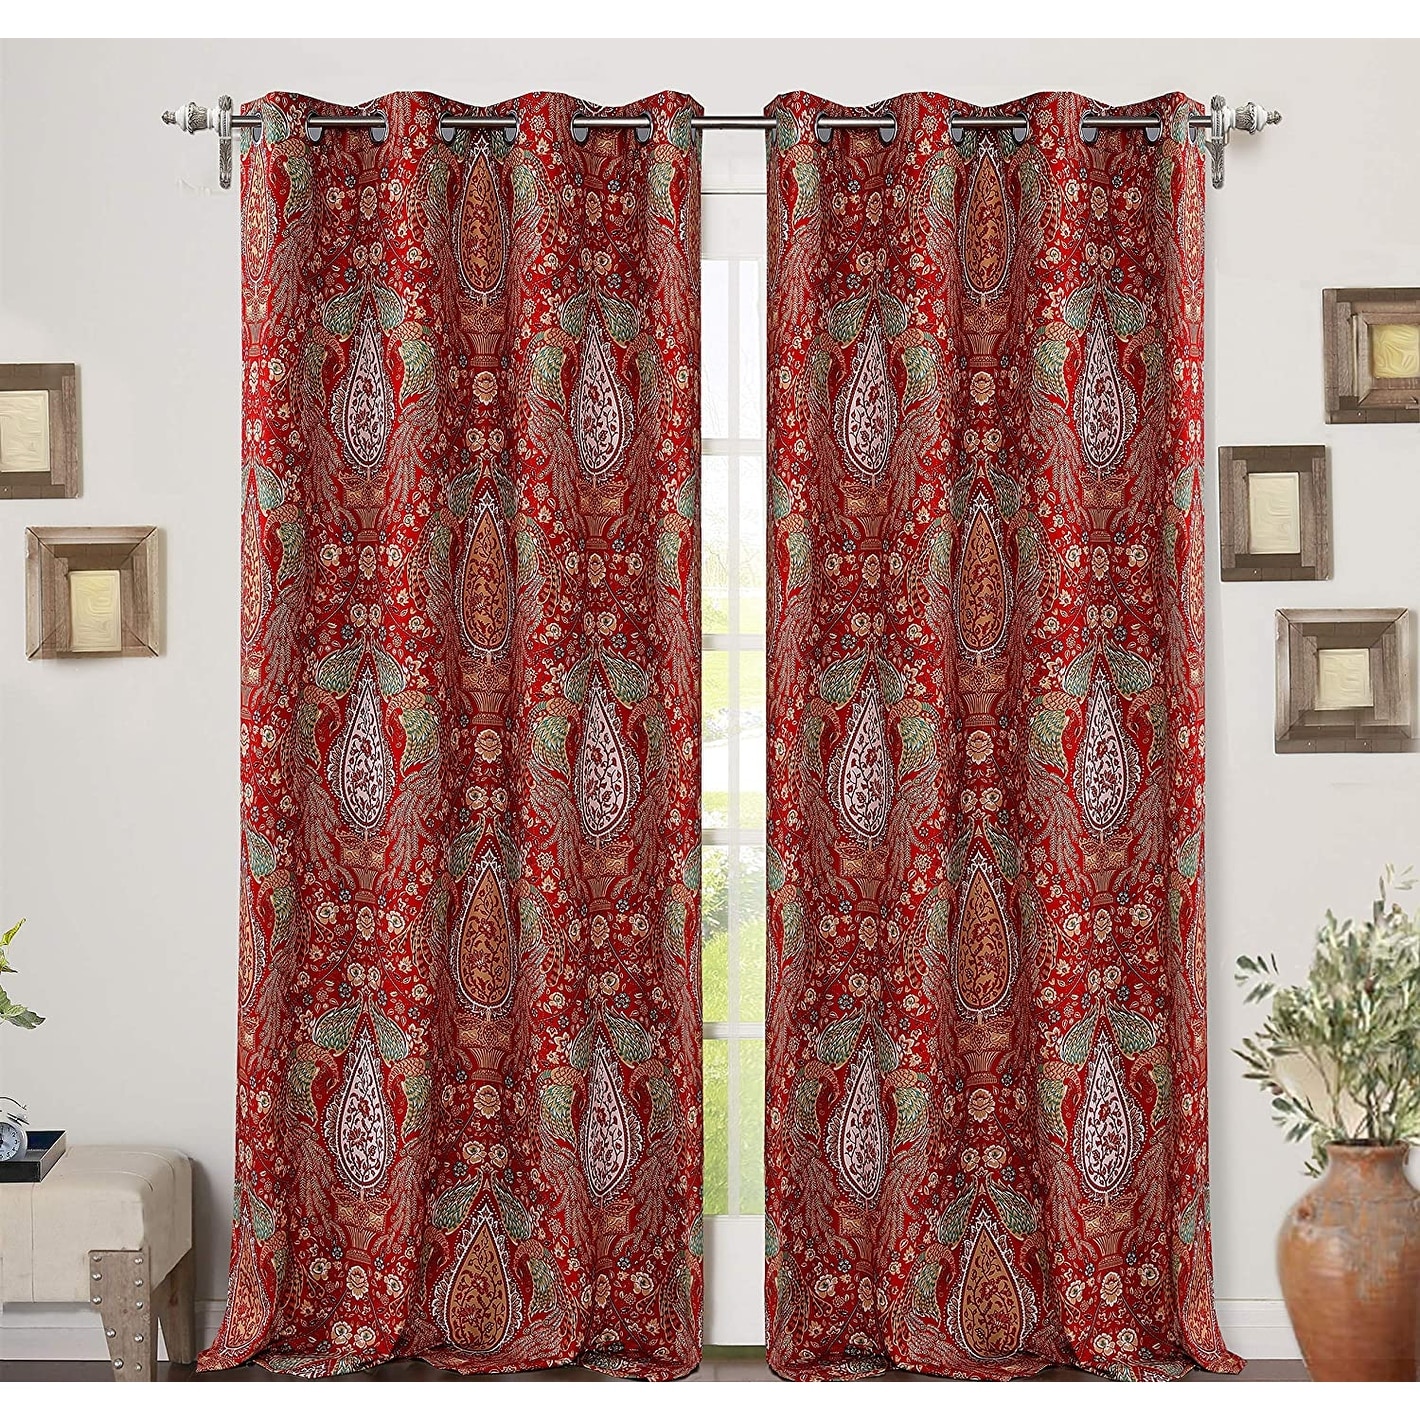 DriftAway Christopher Peacock Floral Pattern Blackout Window Curtain Grommet 2 Layers